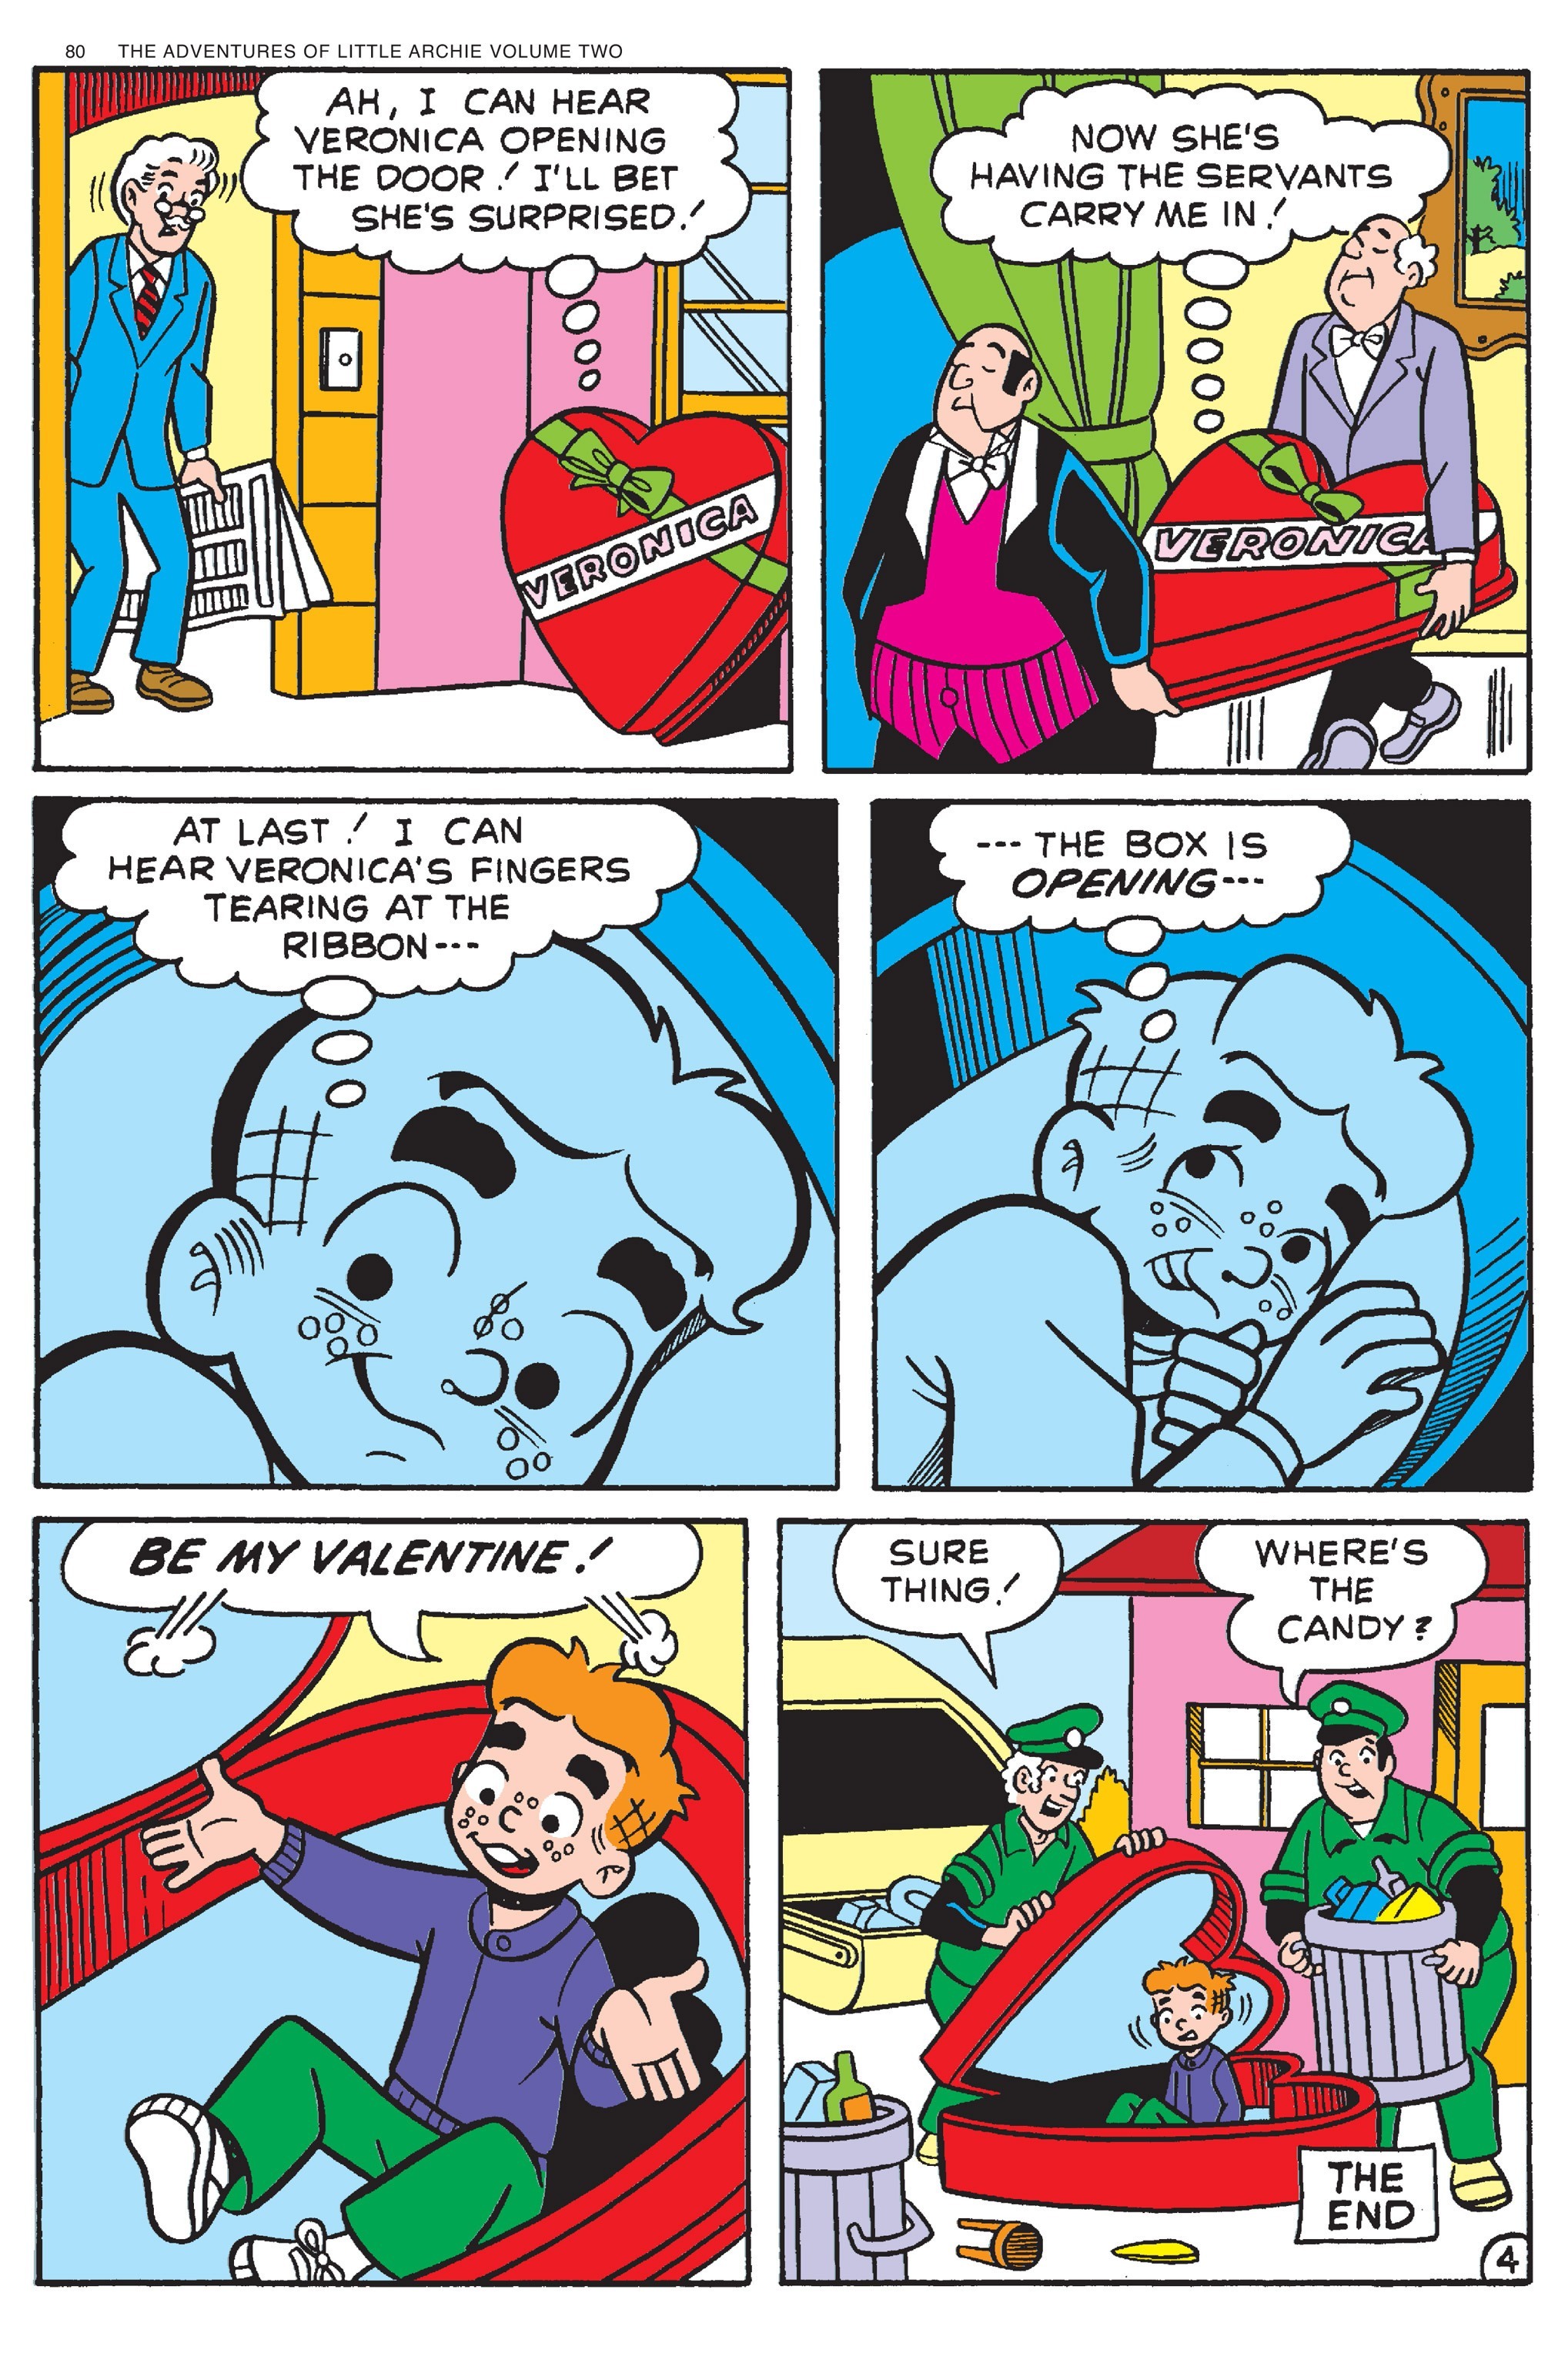 Read online Adventures of Little Archie comic -  Issue # TPB 2 - 81